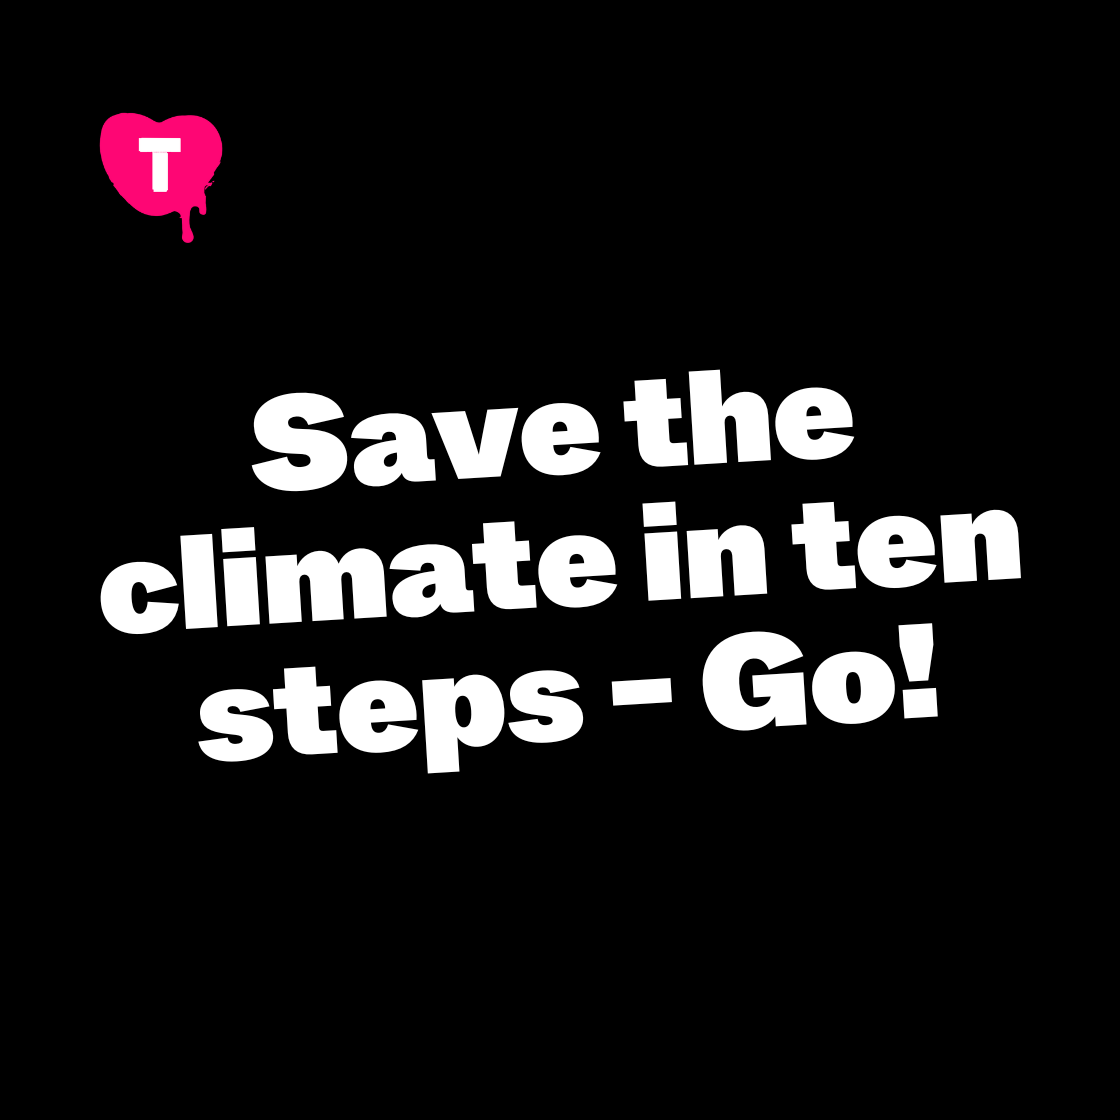 SAVE THE CLIMATE IN TEN STEPS - GO!